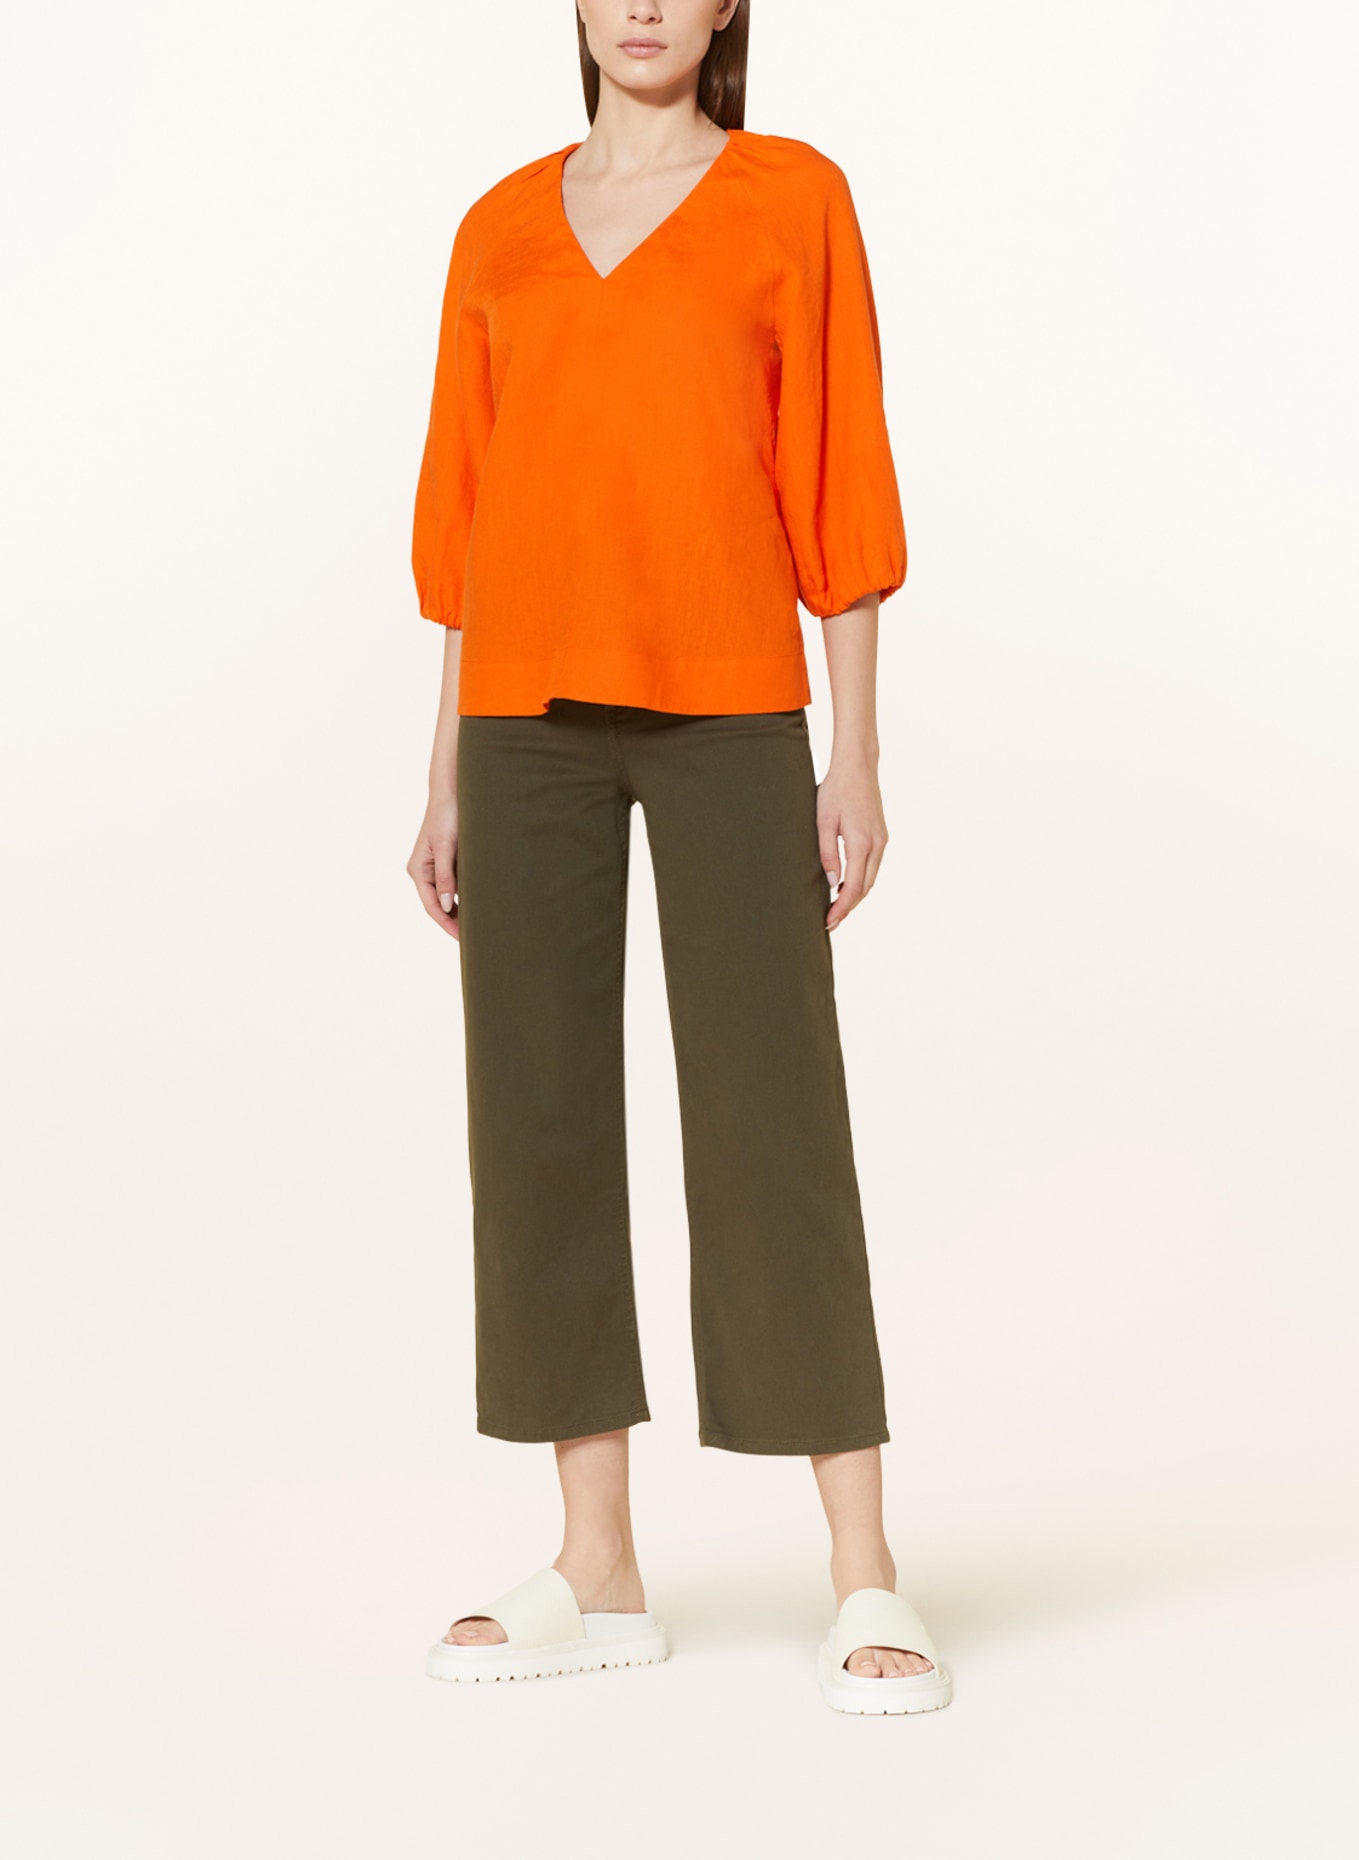 Marc O'Polo Shirt blouse in mixed materials with 3/4 sleeves, Color: ORANGE (Image 2)